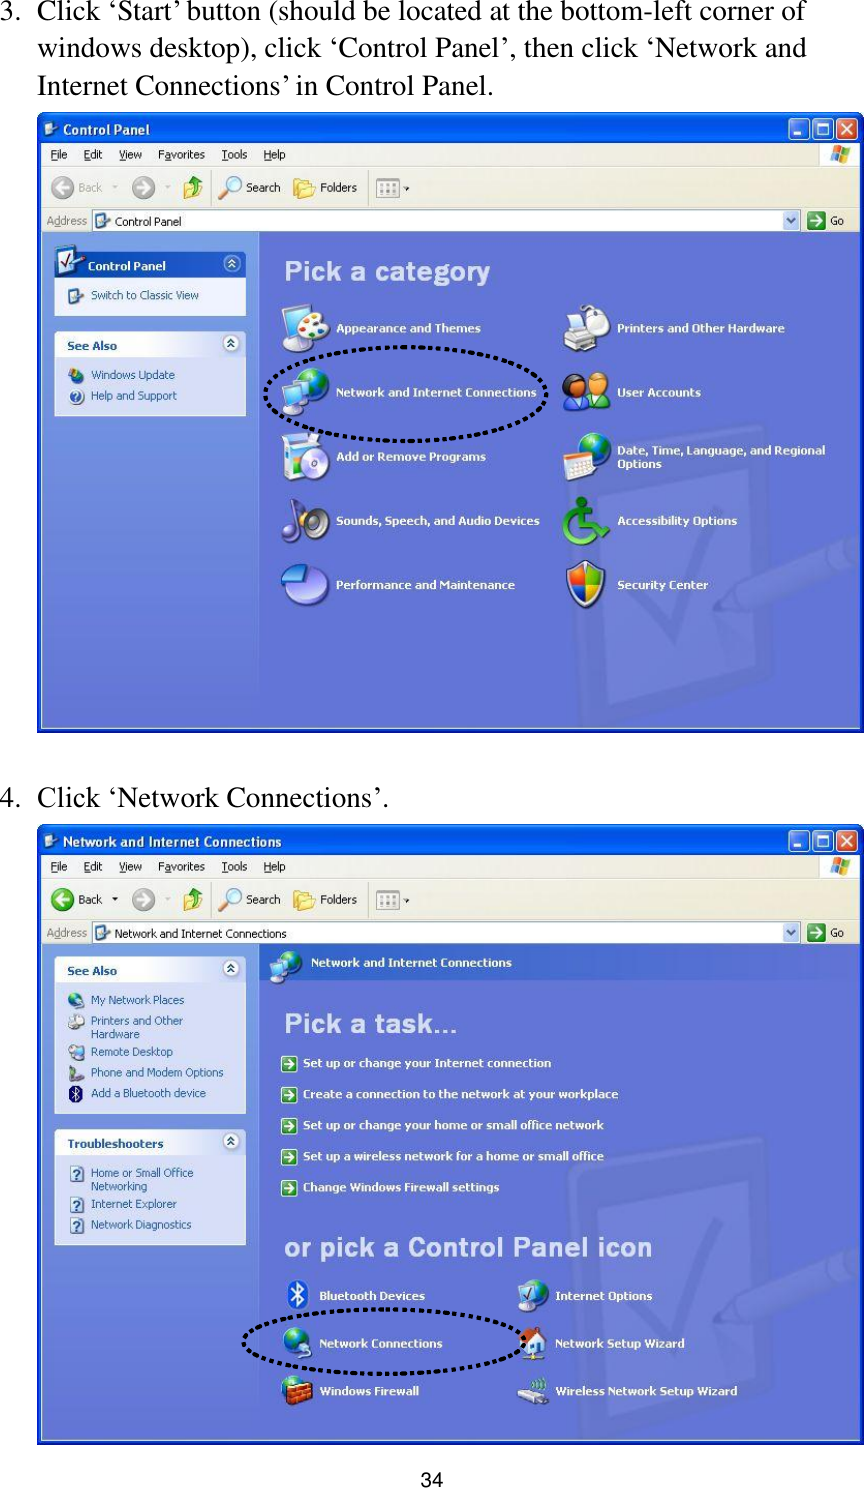  34 3. Click „Start‟ button (should be located at the bottom-left corner of windows desktop), click „Control Panel‟, then click „Network and Internet Connections‟ in Control Panel.   4. Click „Network Connections‟.  